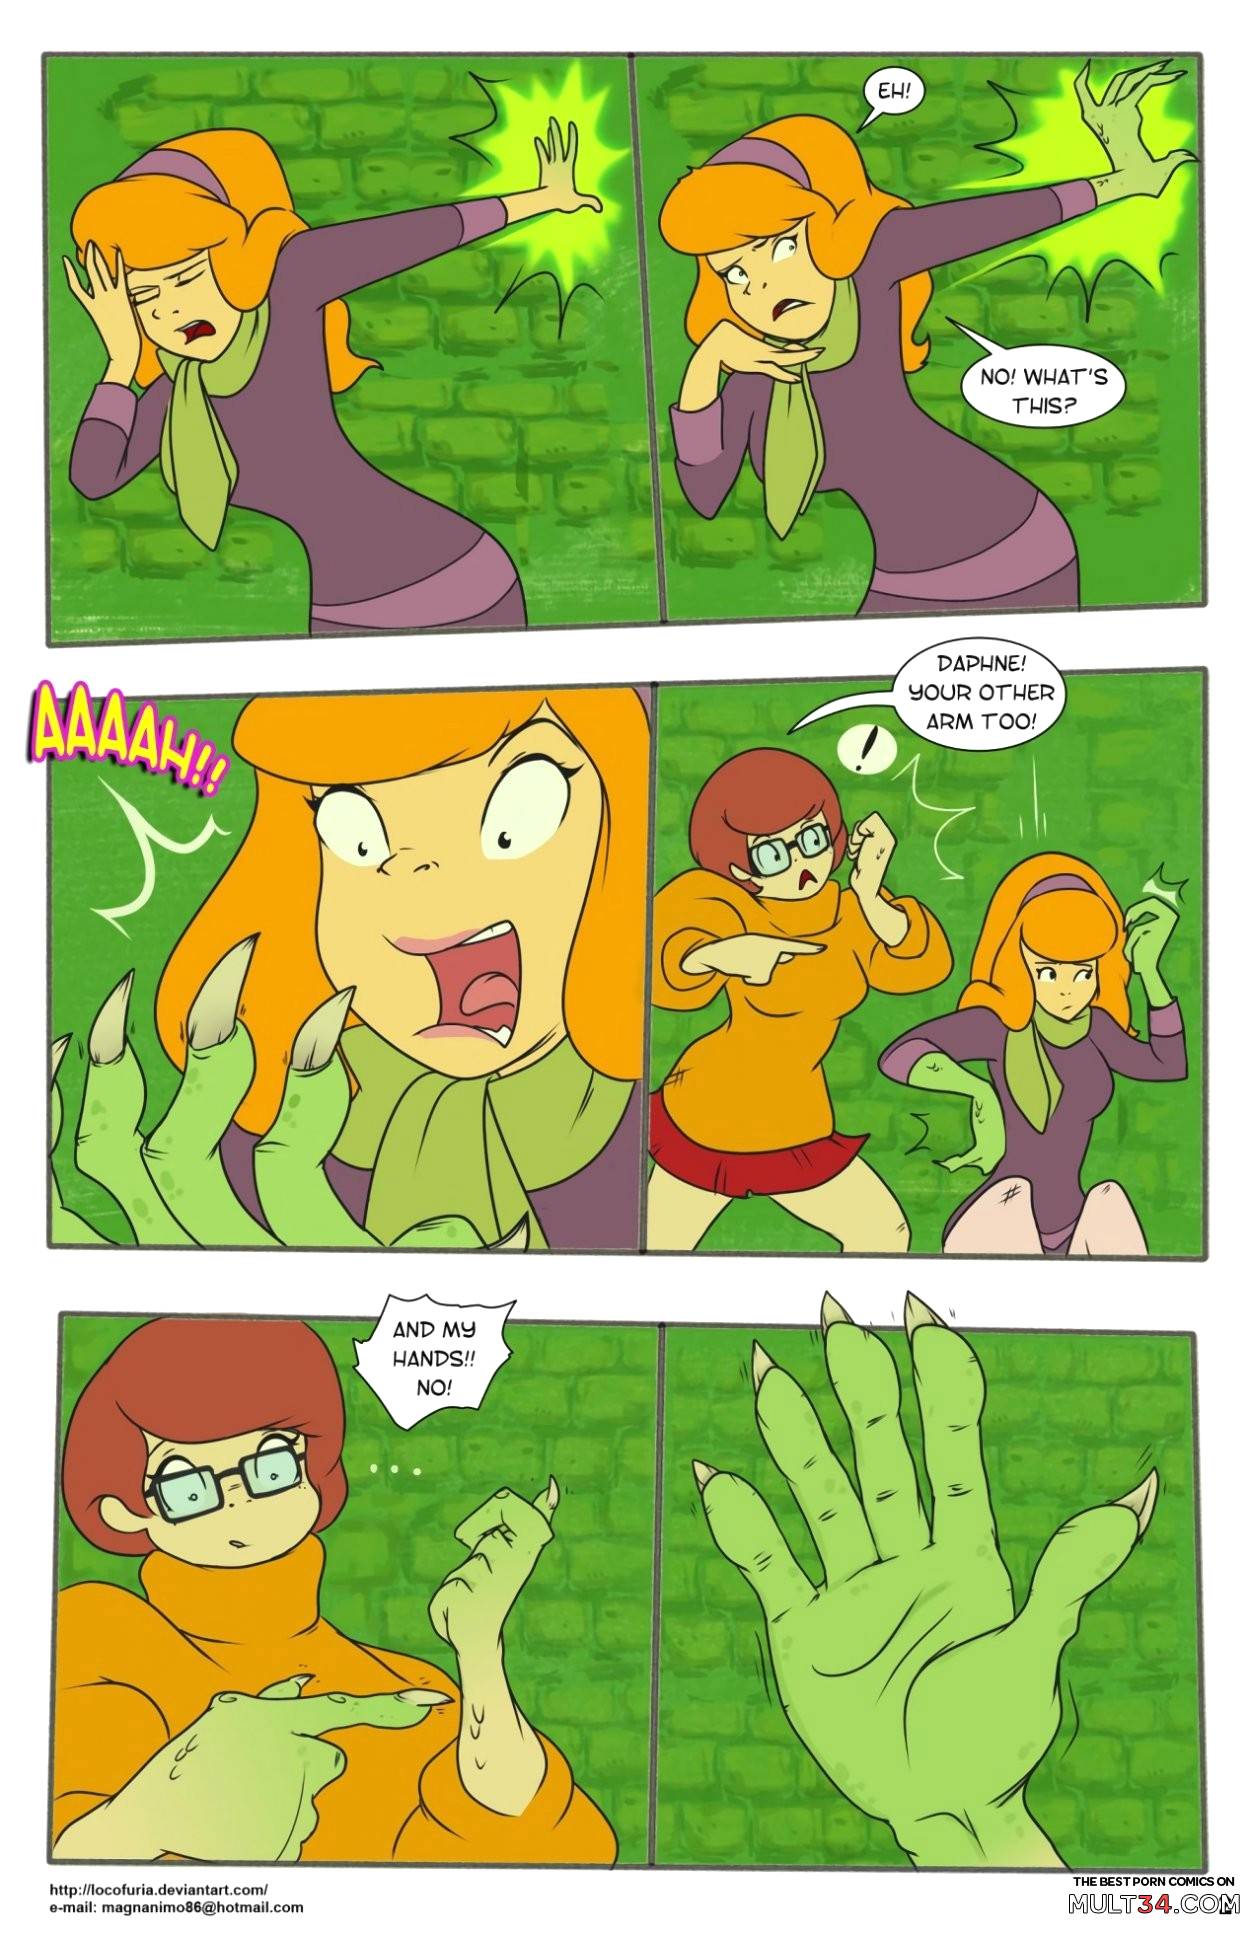 The Goblin King (Scooby Doo) page 3